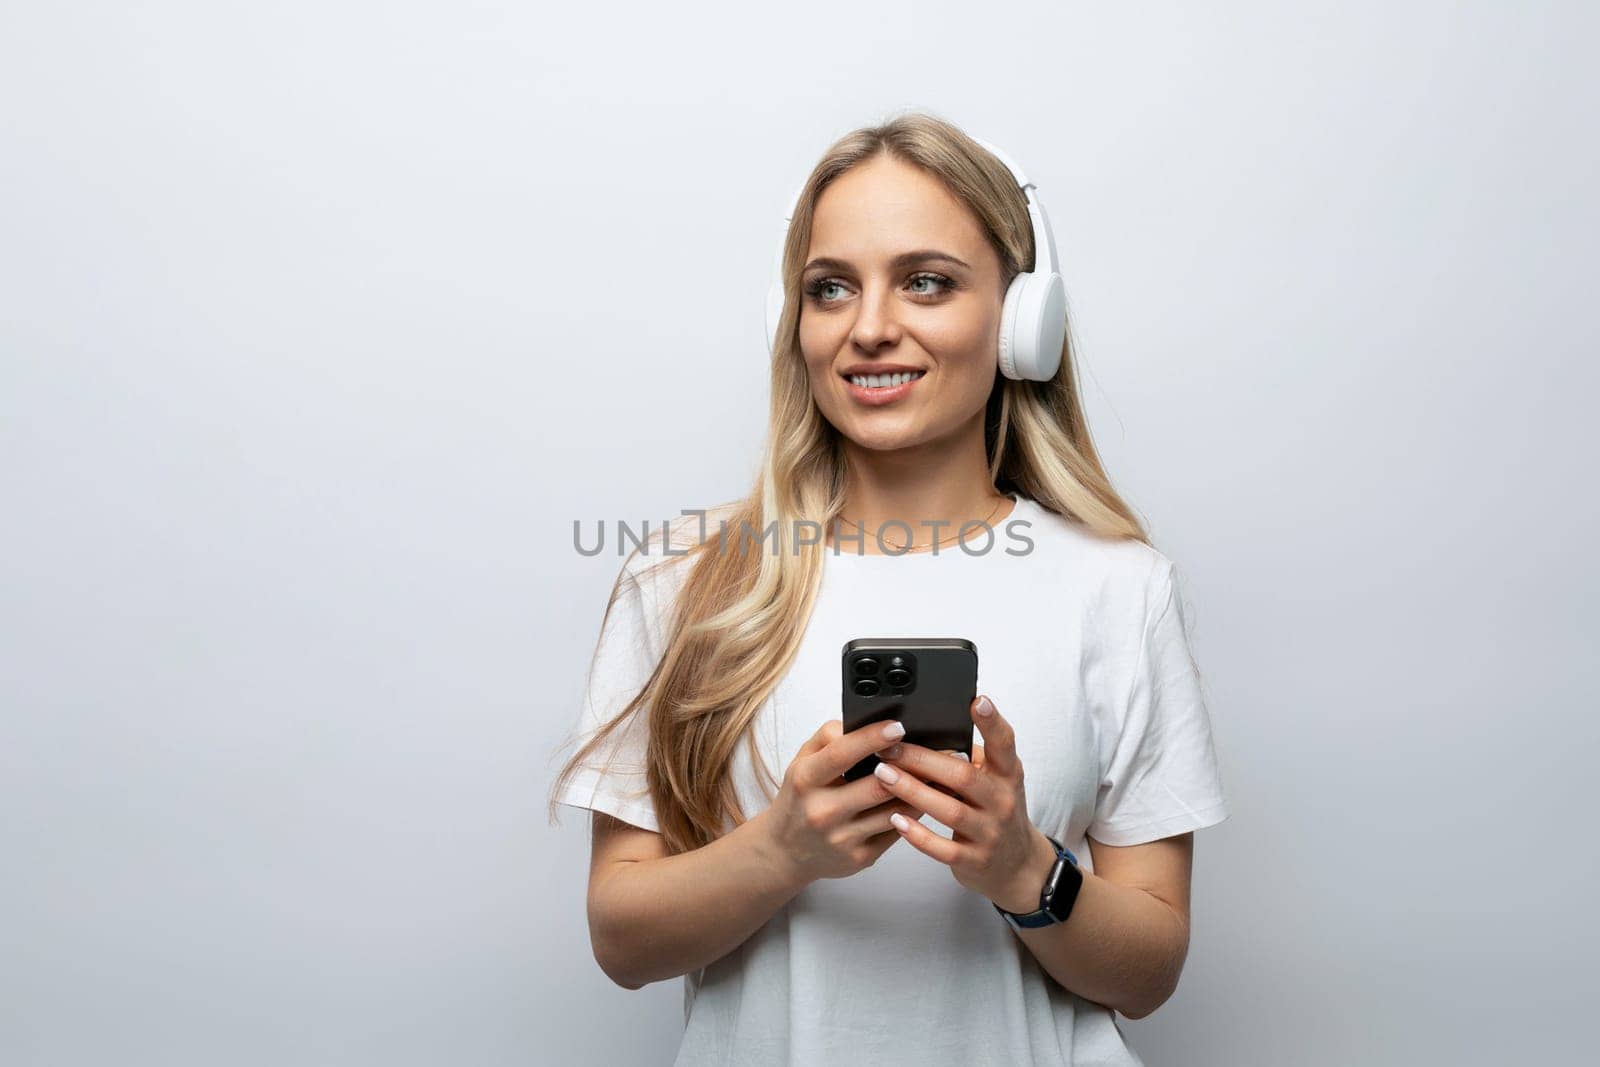 blogger girl with a headset on her head and a phone in her hands on a white background by TRMK